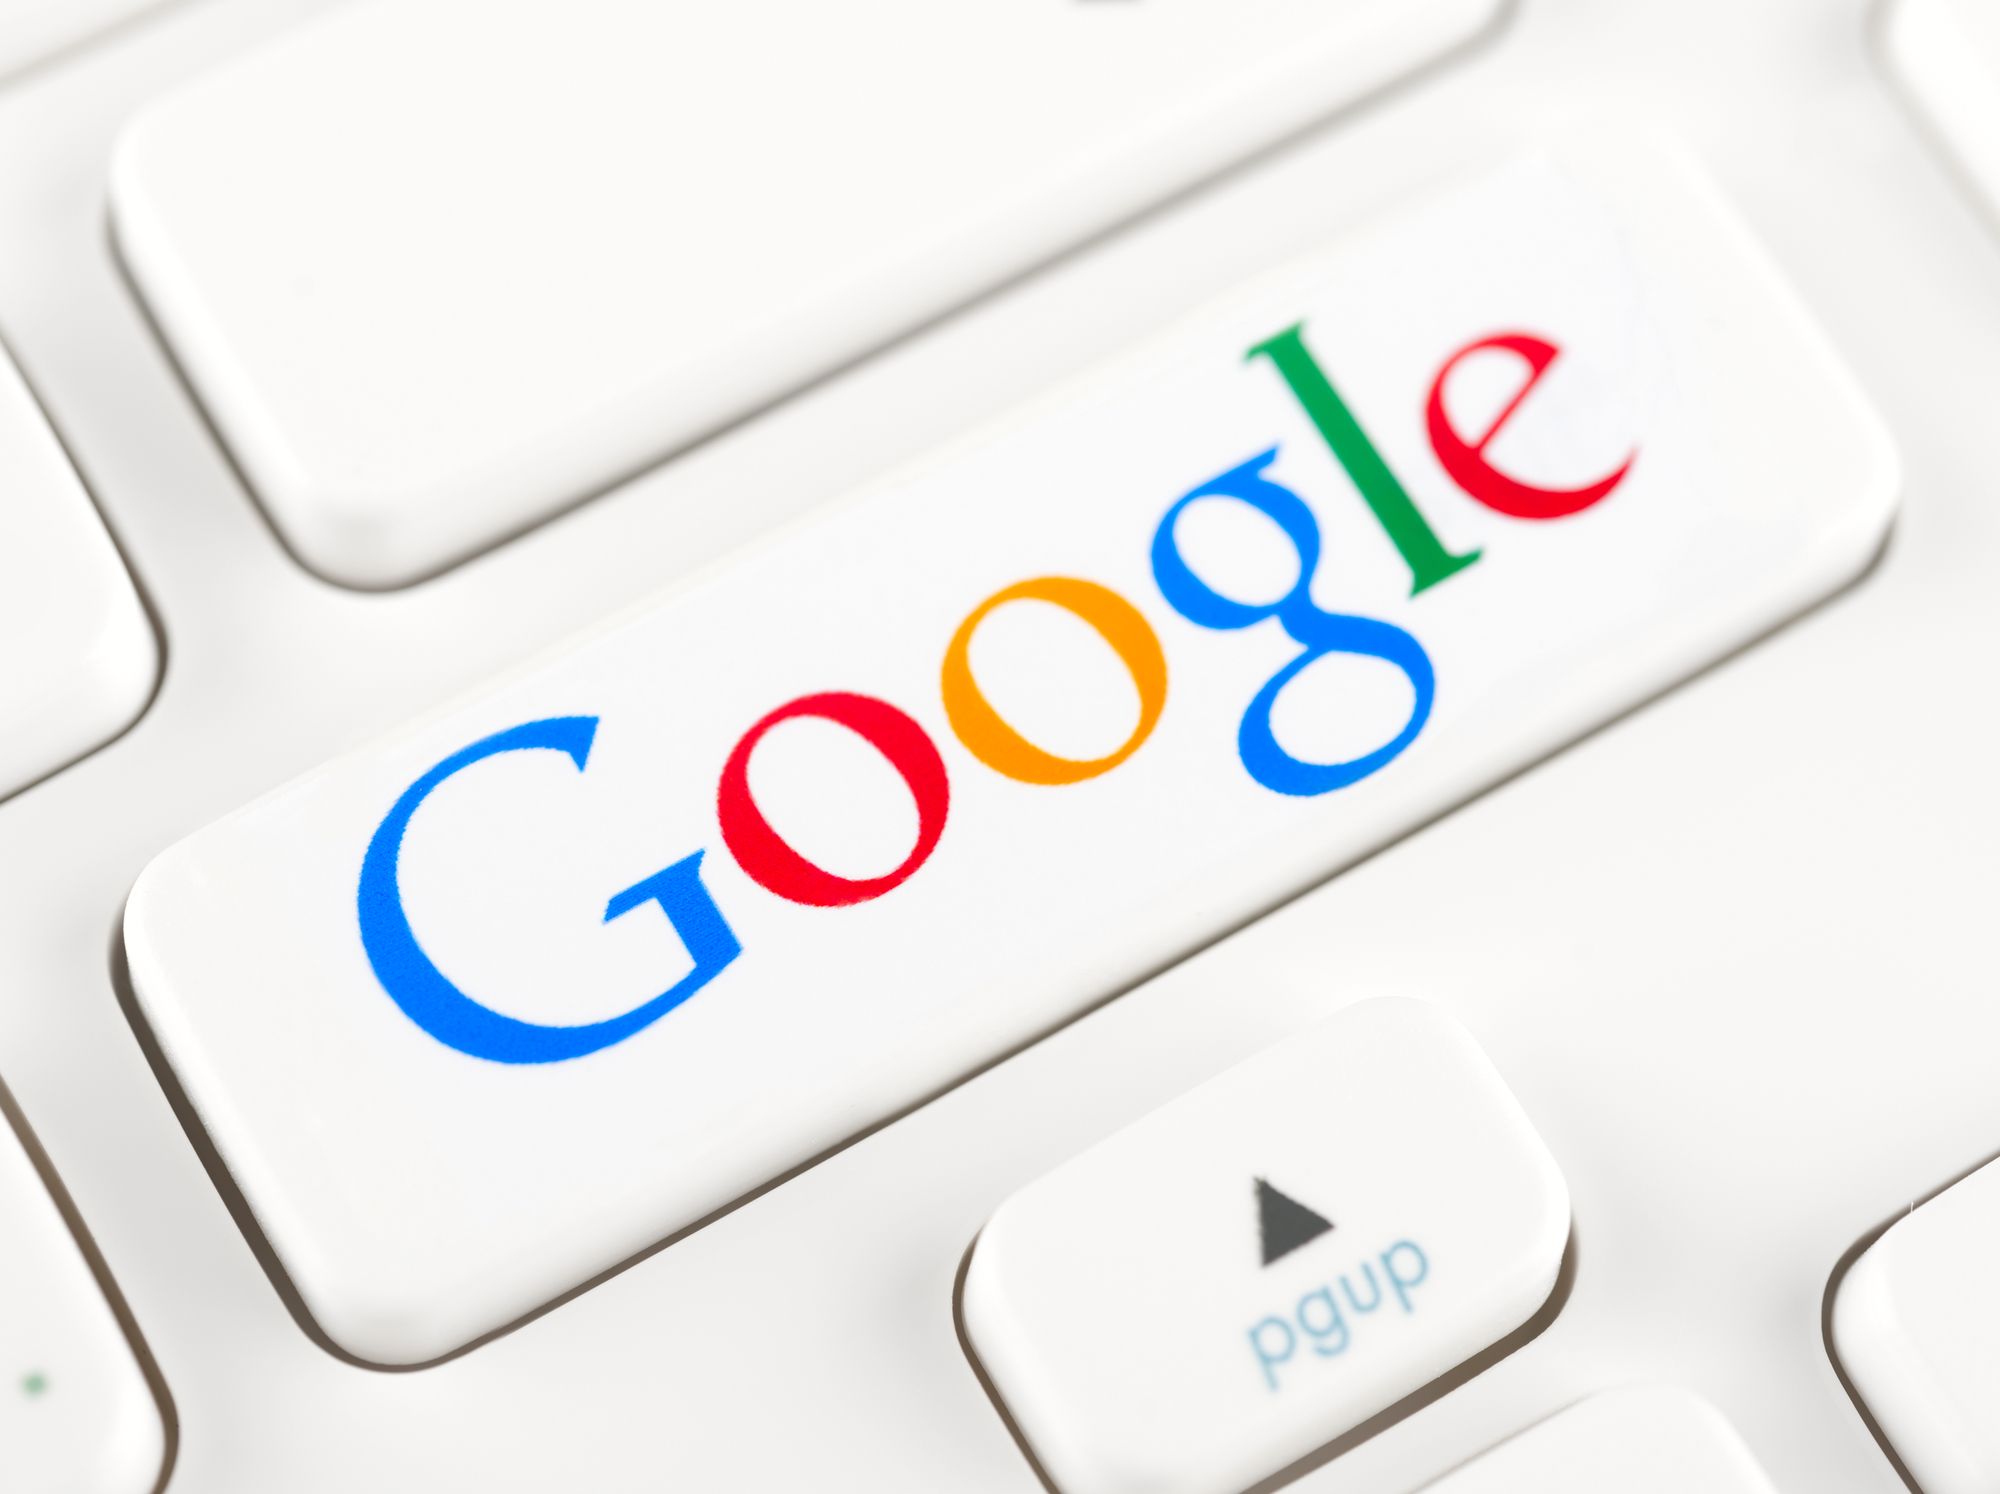 SIMFEROPOL, RUSSIA - NOVEMBER 22, 2014: Photo shoot of Google logotype on a keyboard button. Google is an American multinational corporation specializing in Internet-related services and products